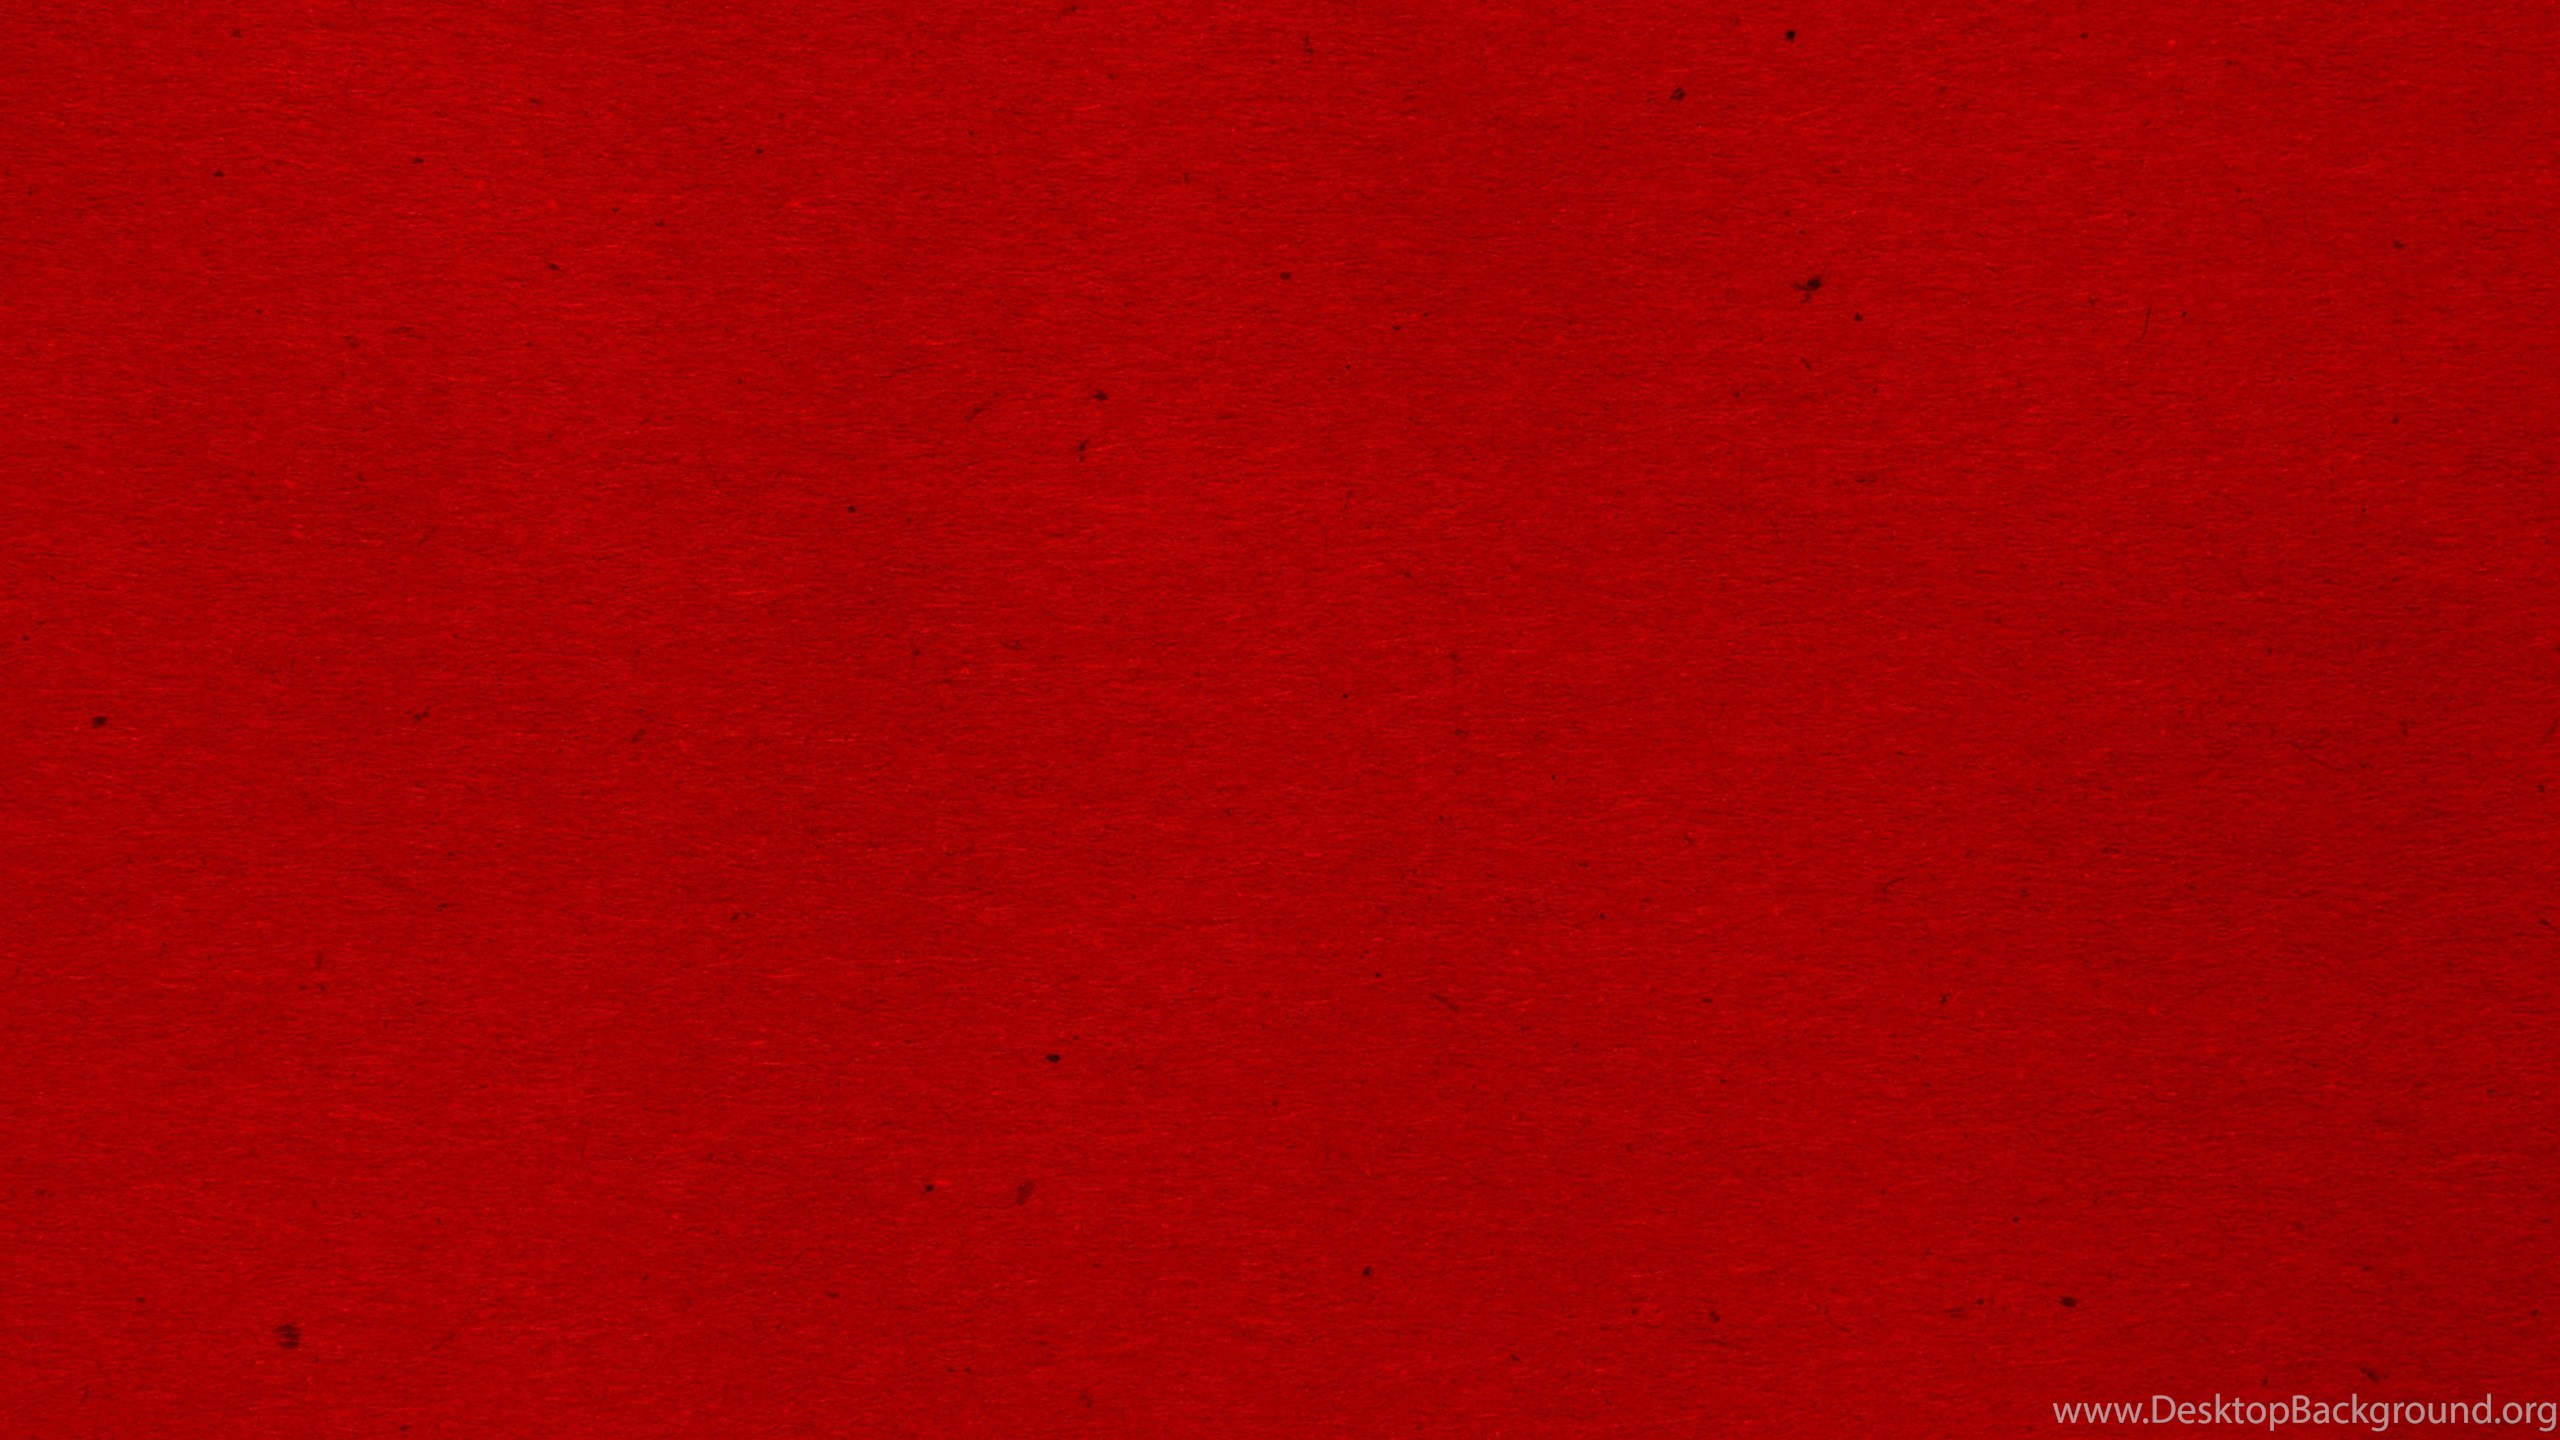 Deep Red Paper Texture With Flecks Picture Desktop Background2560 x 1440